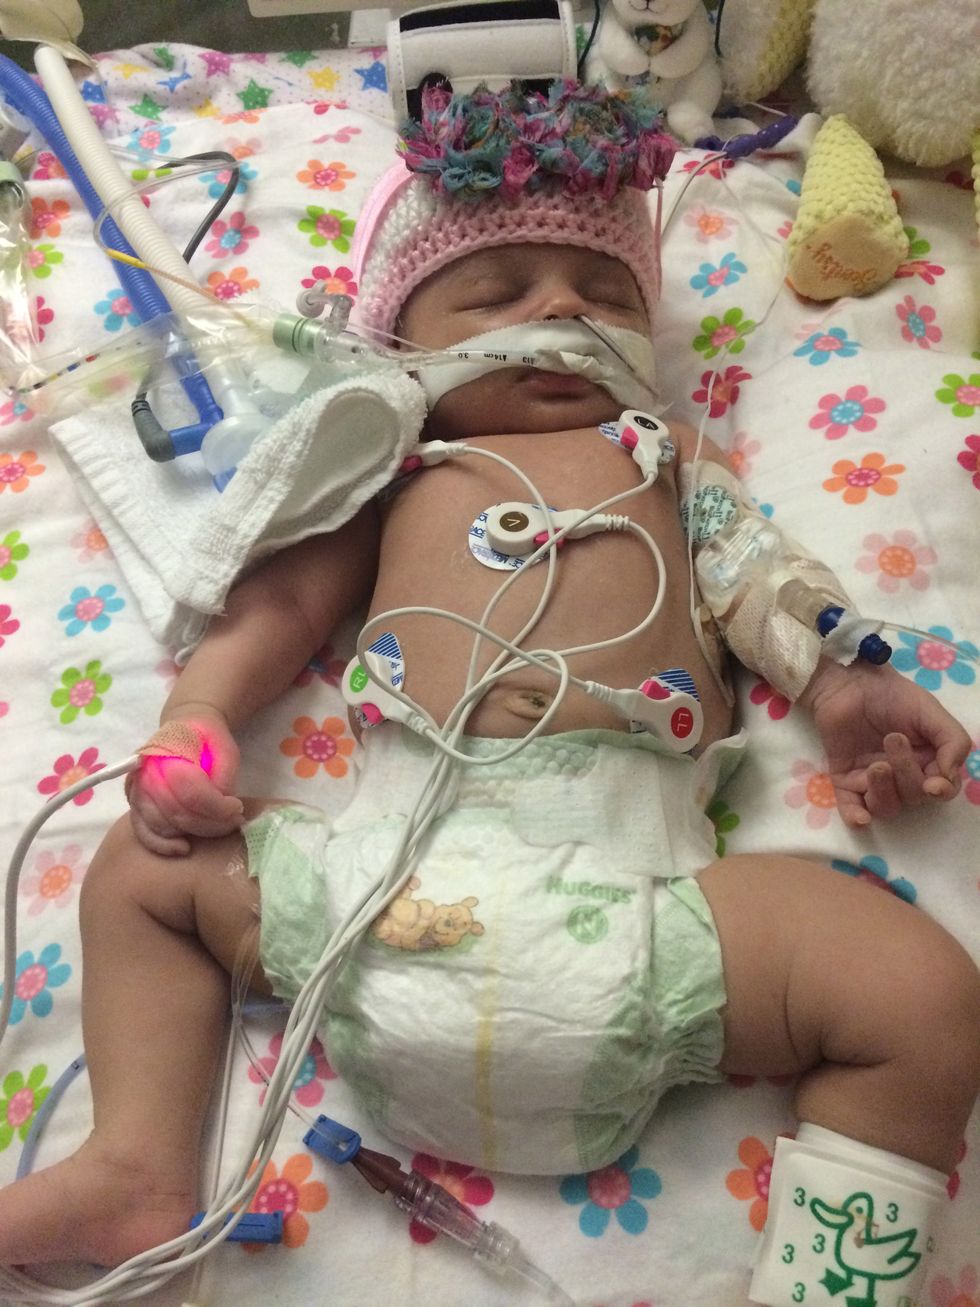 Doctors Said This Baby's Condition Was 'Incompatible With Life,' but When They Removed Her Ventilator Something 'Miraculous' Happened